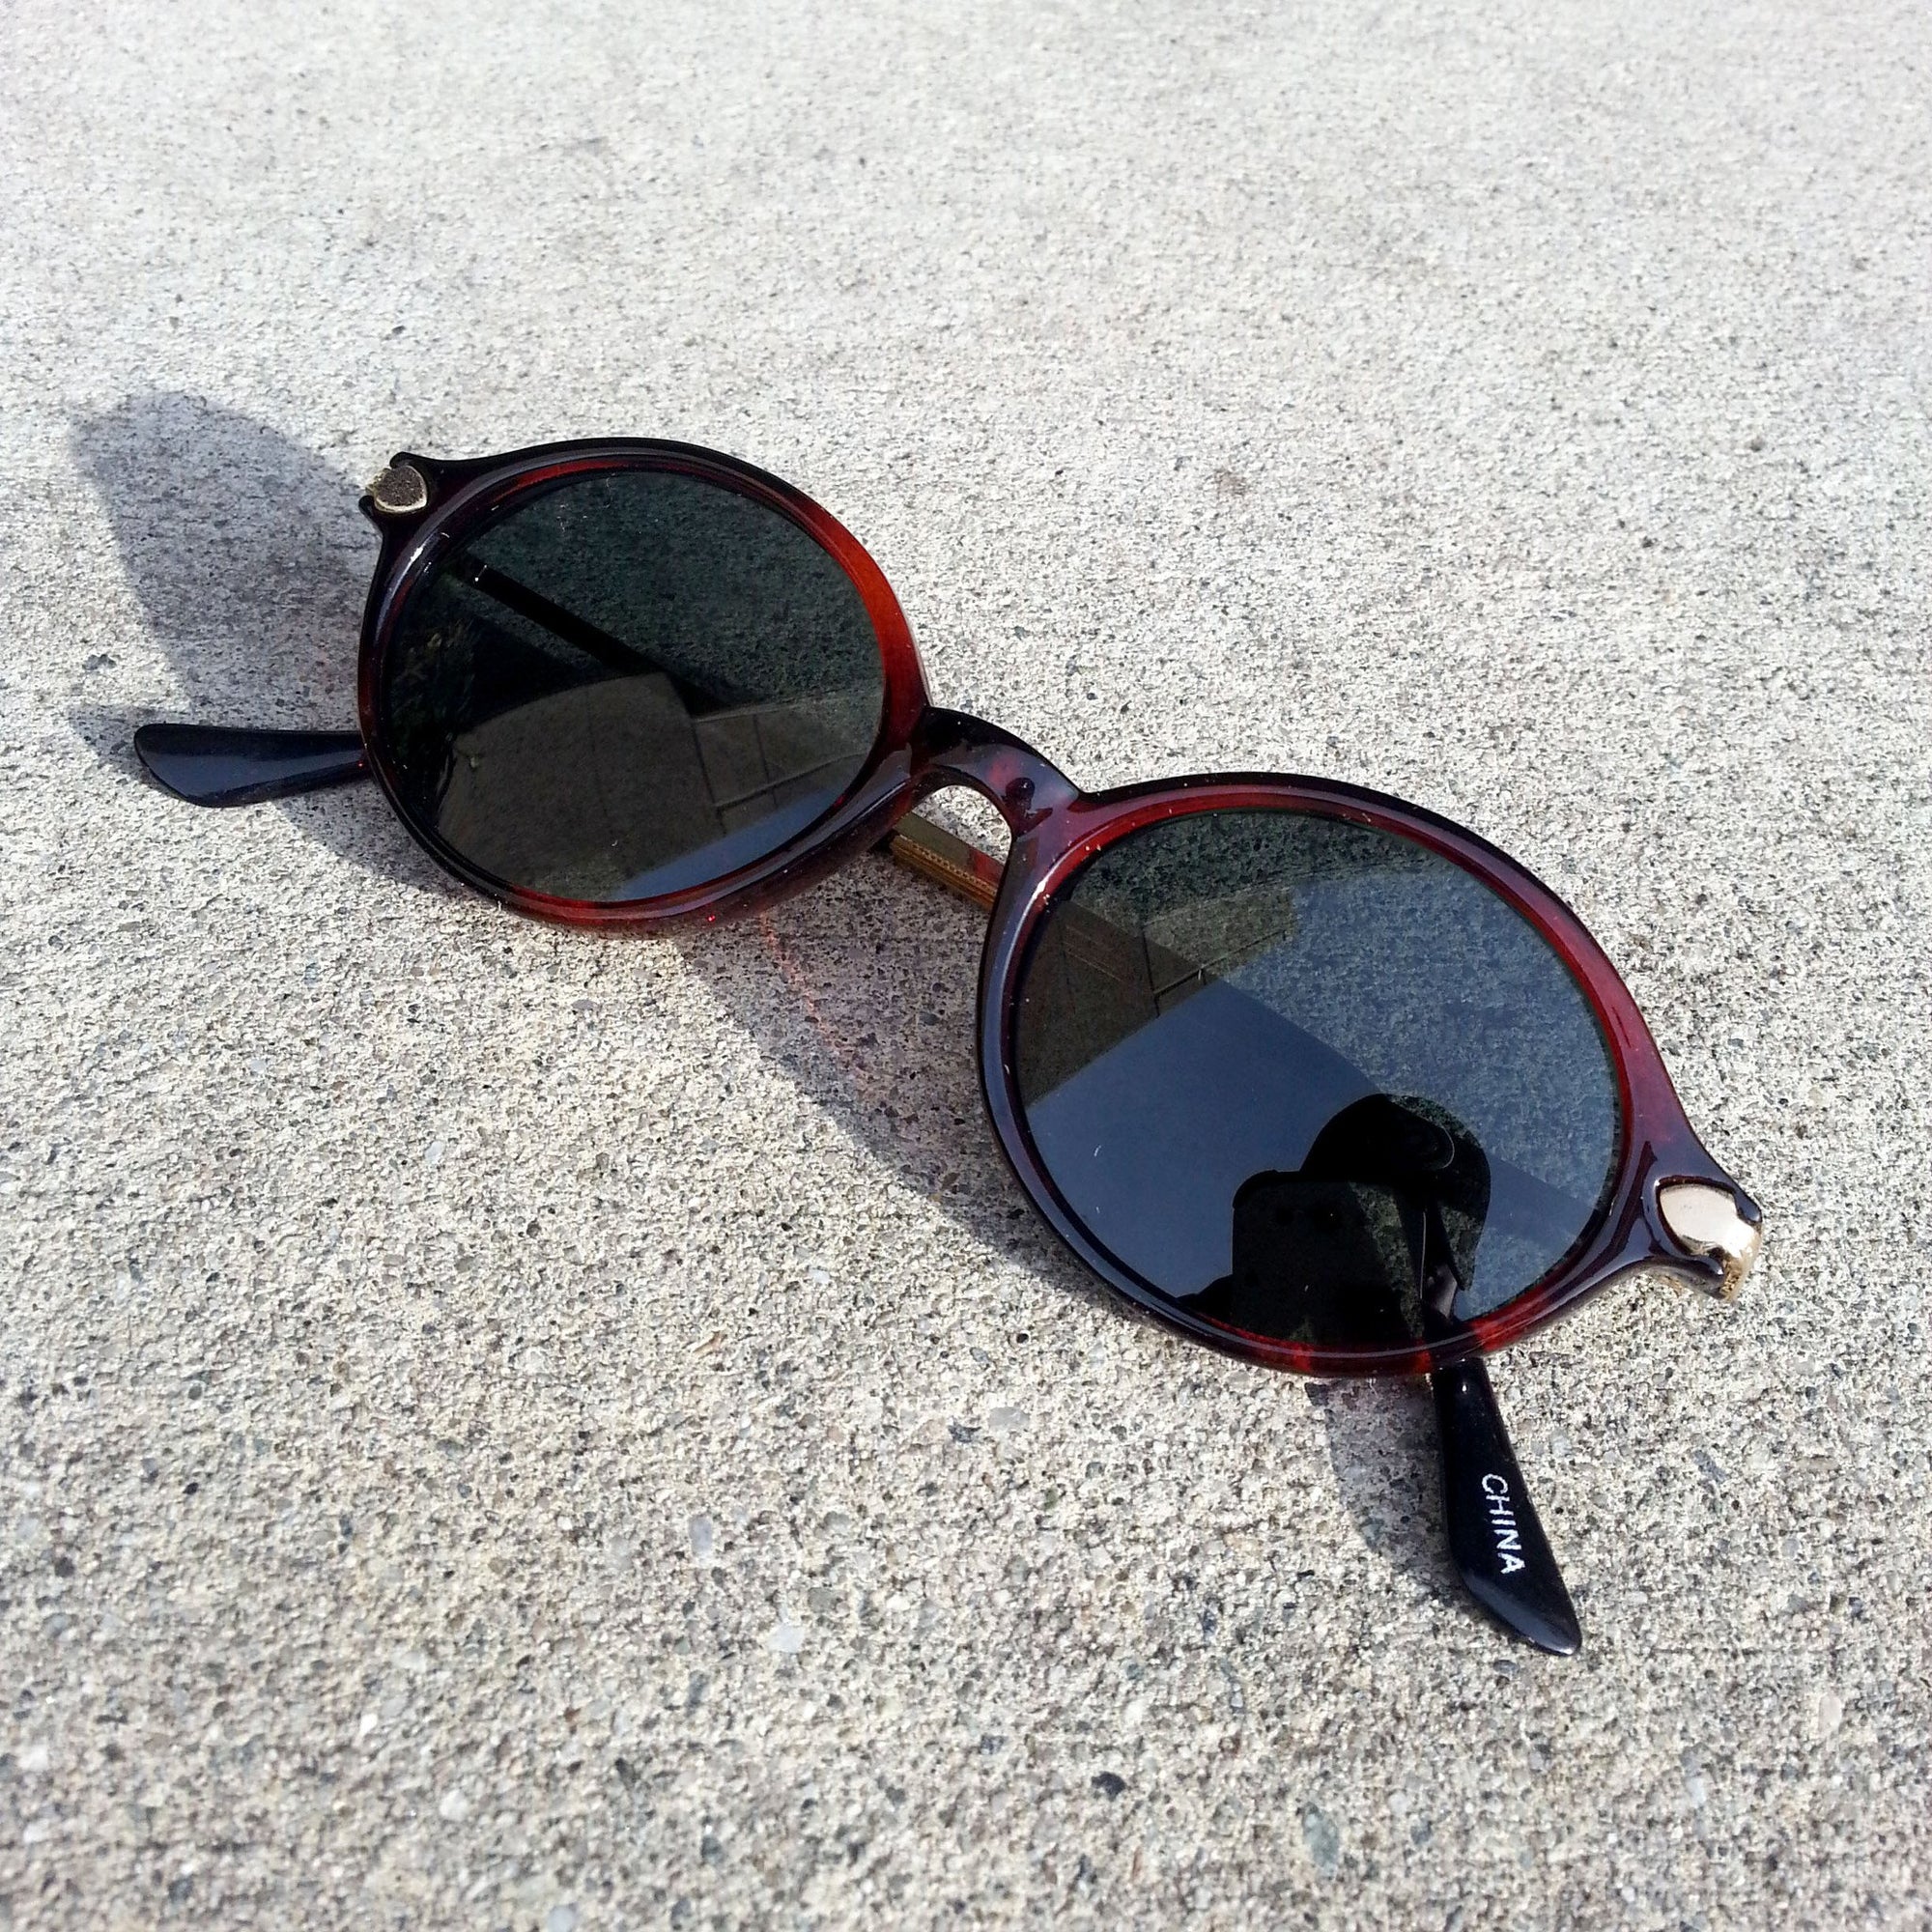 True Vintage 1960's Oval Spectacle Sunglasses